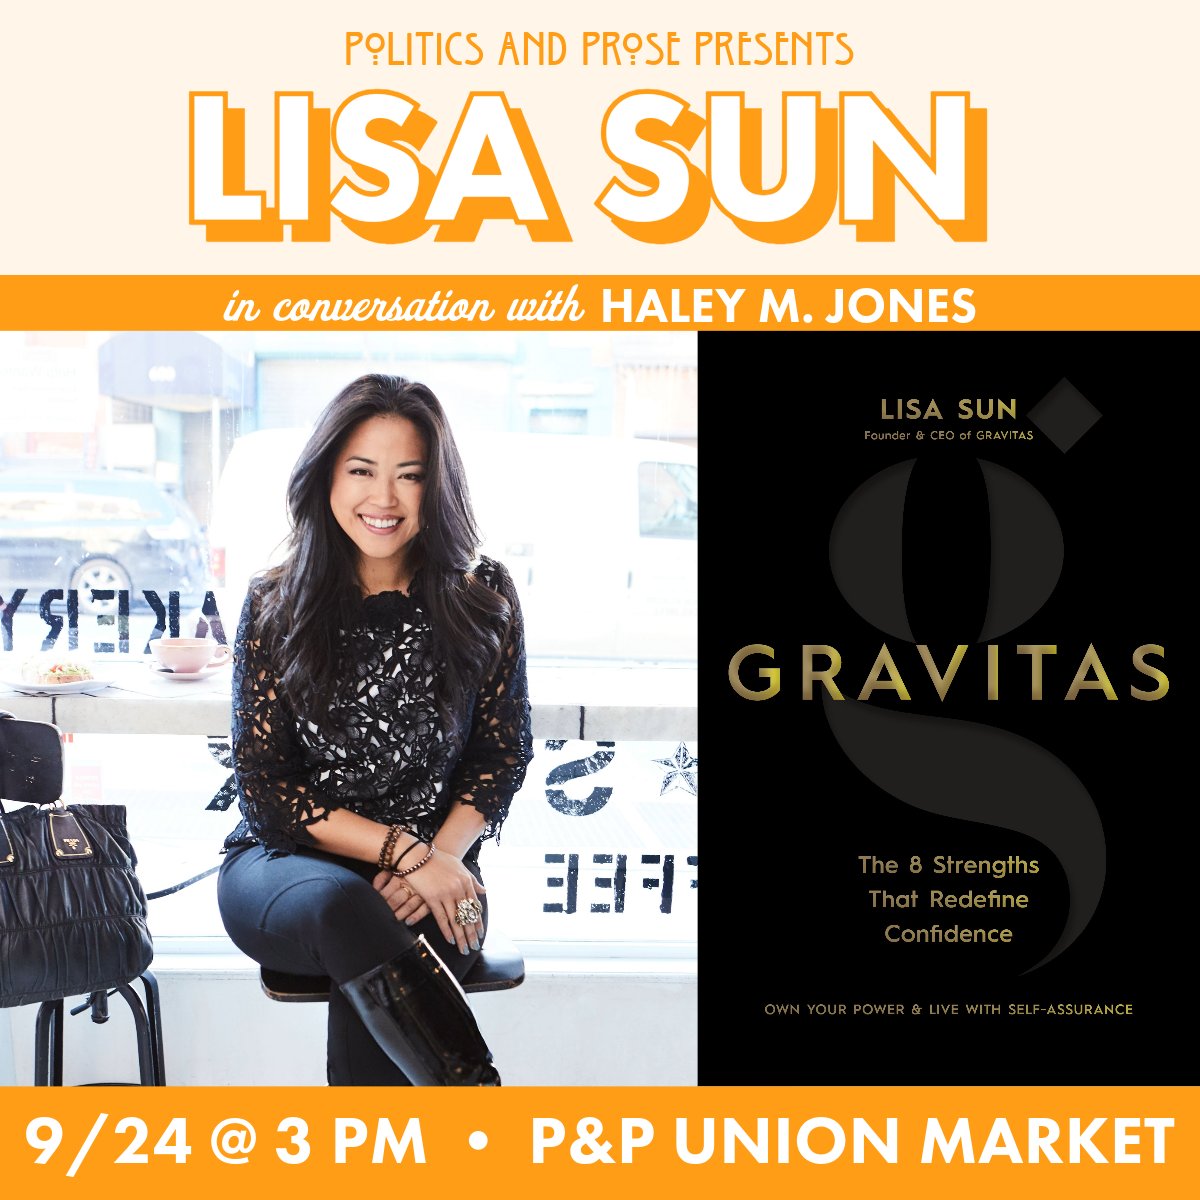 Sunday, join @lisalsun at P&P to discuss GRAVITAS, a thought-provoking and practical guide for women to build their self-worth on their own terms. 3pm @ @unionmarketdc w/ Haley M. Jones - politics-prose.com/lisa-sun